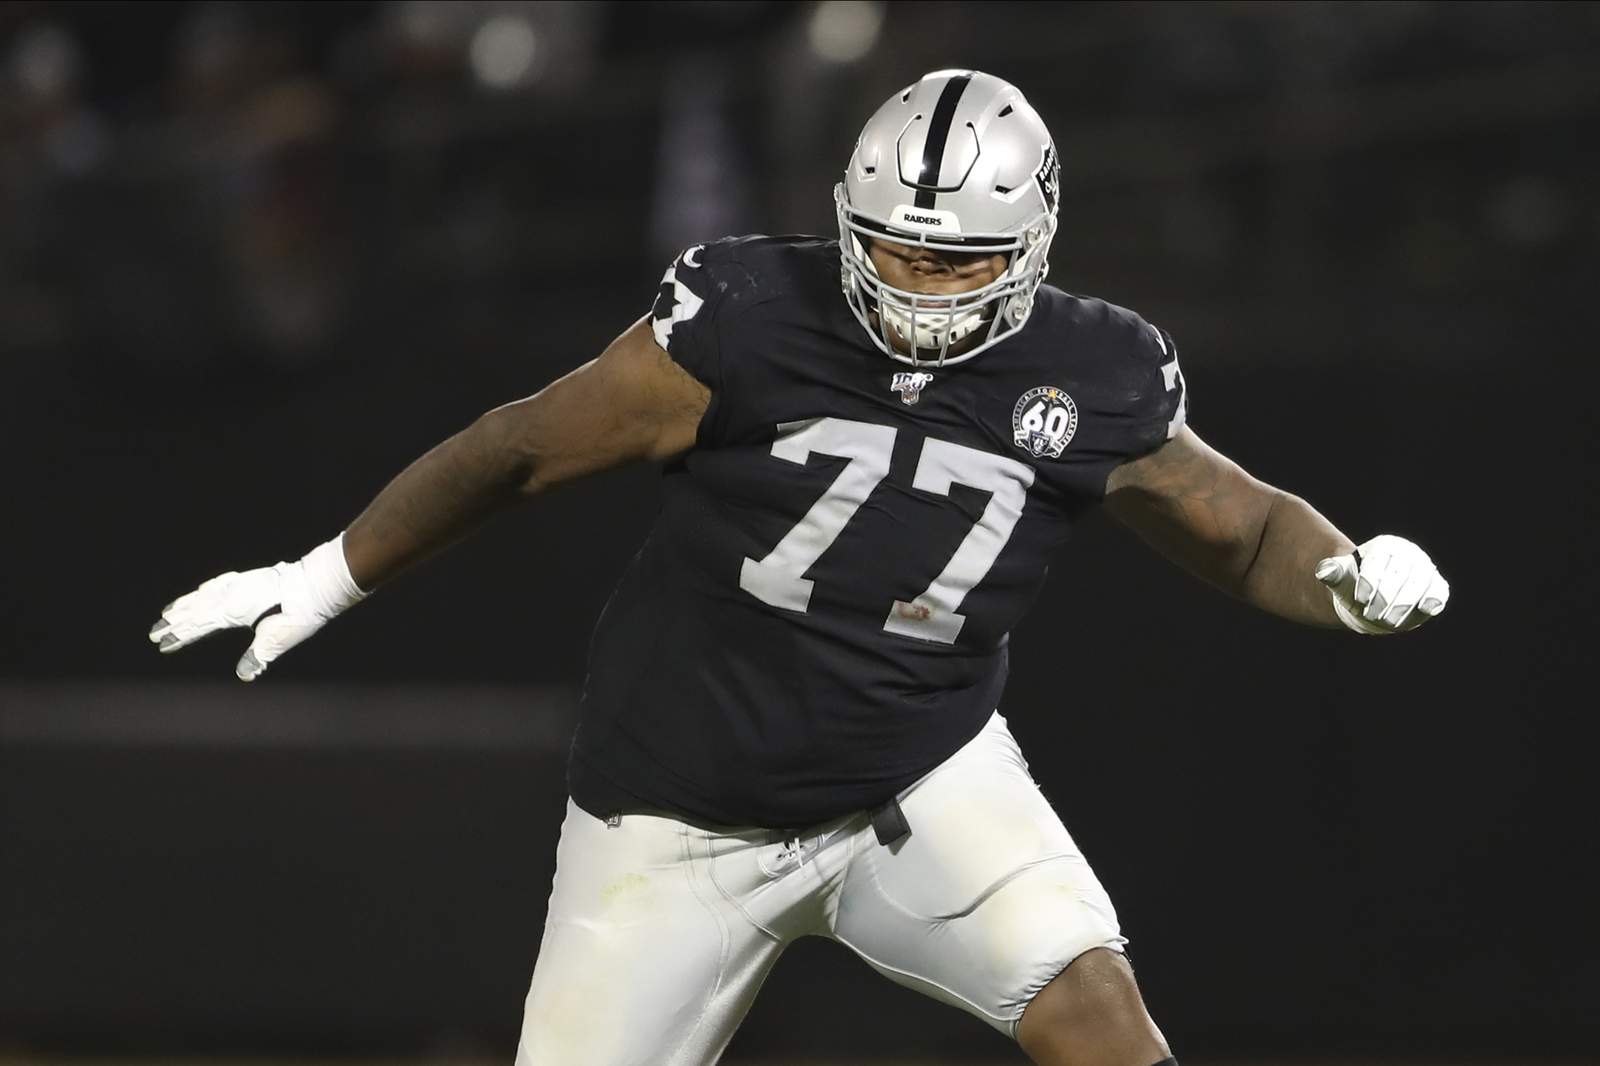 AP sources: Raiders place 5 more players on COVID-19 list